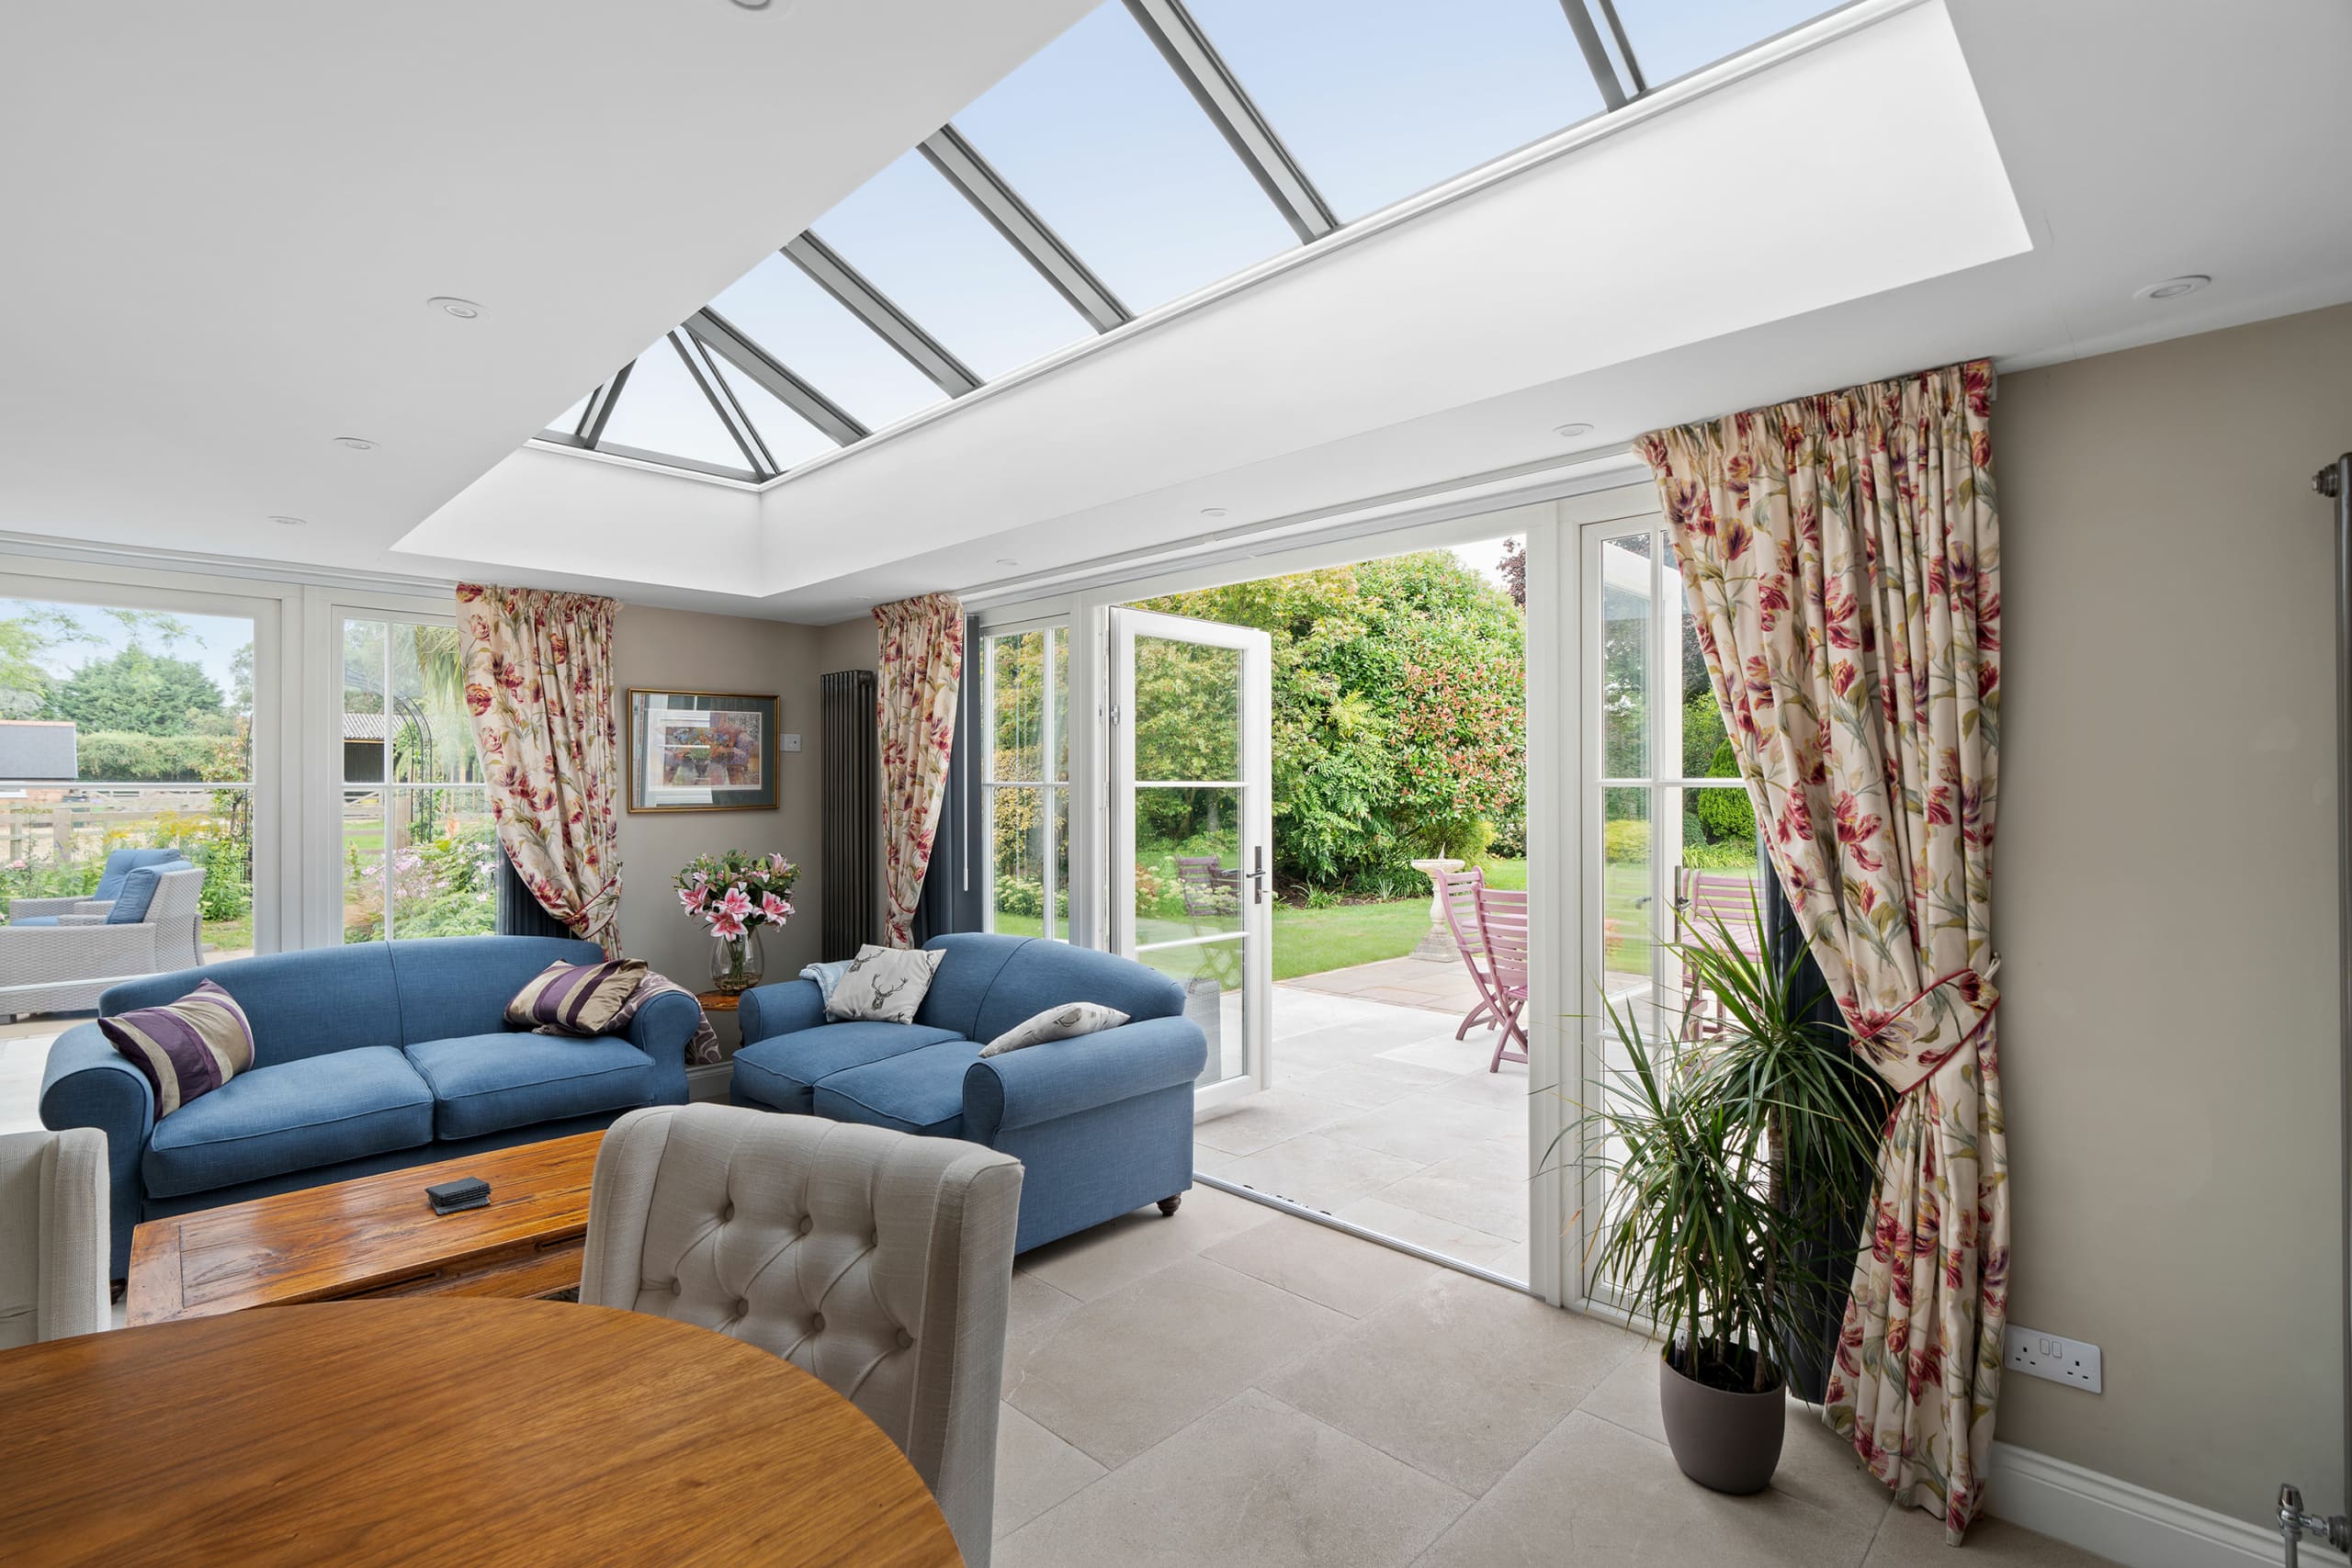 Traditional living room and dining area with a roof lantern and french doors leading to pation area.